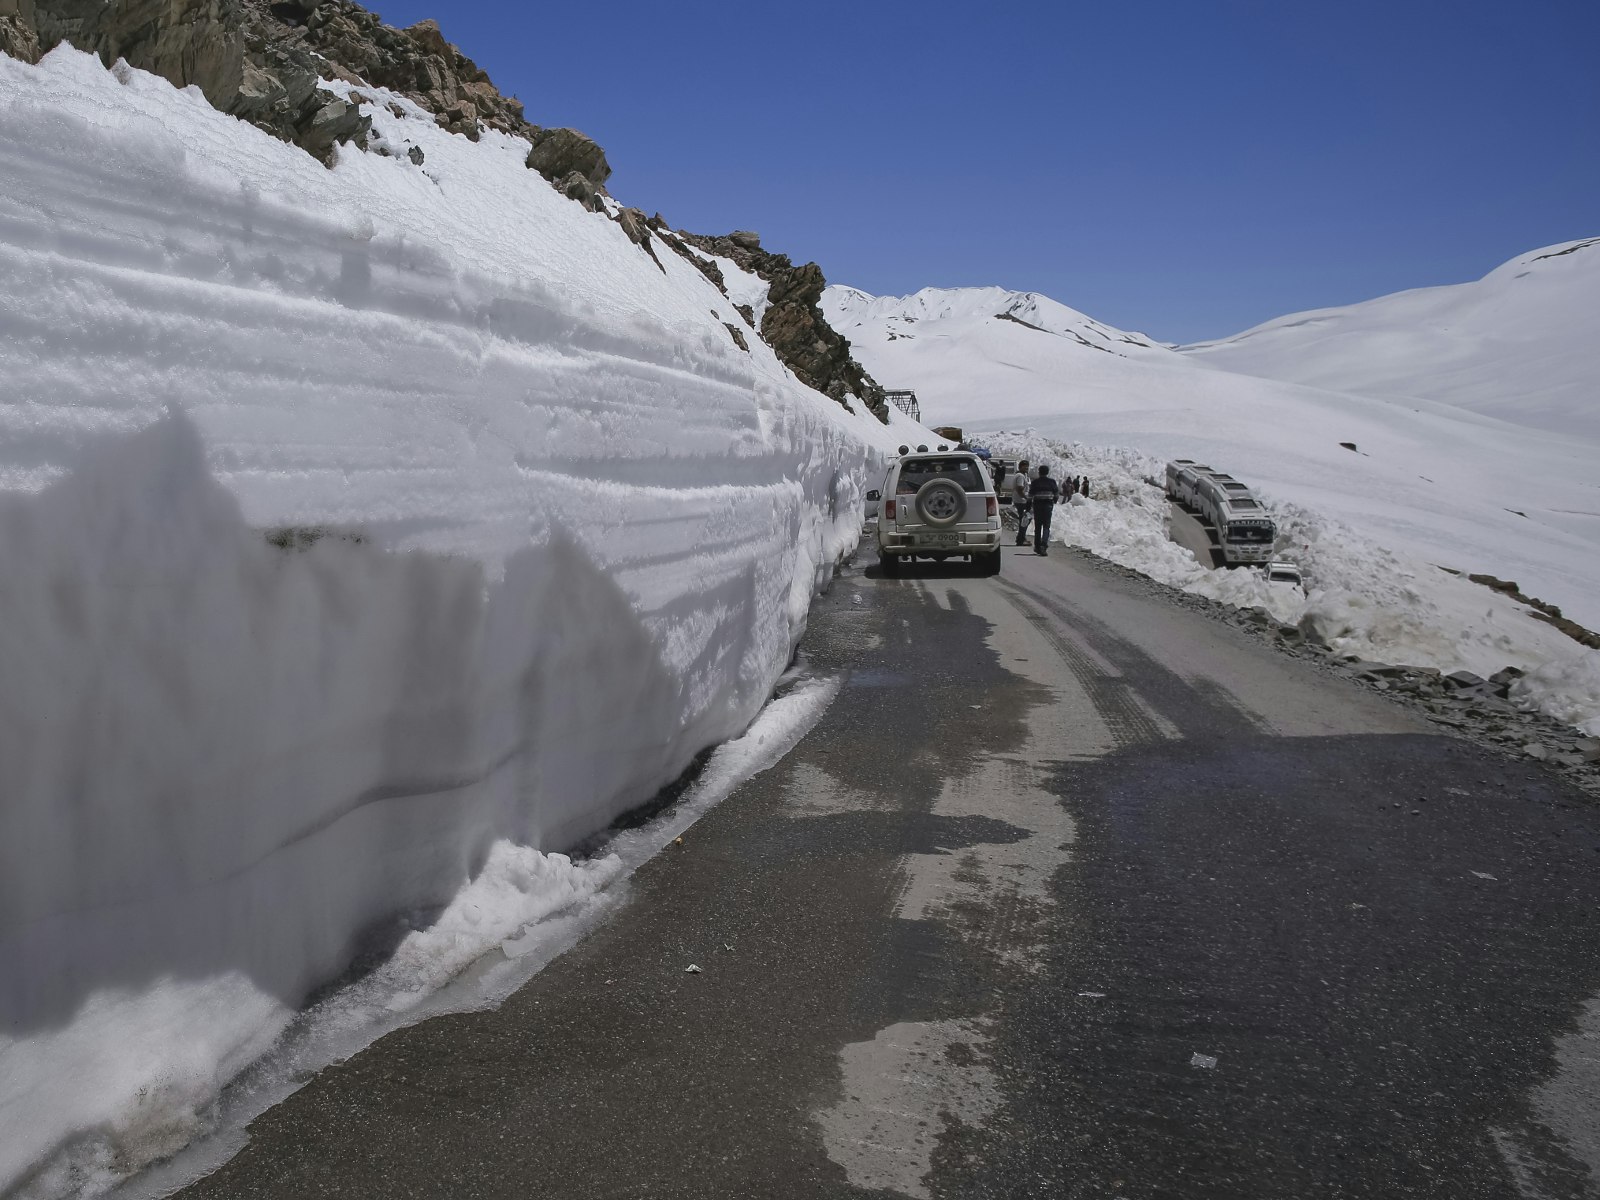 Traffic slows to better navigate heavy snowfall on the Rohtang Pass of the Manali-Leh Highway © EASYWAY / Shutterstock 